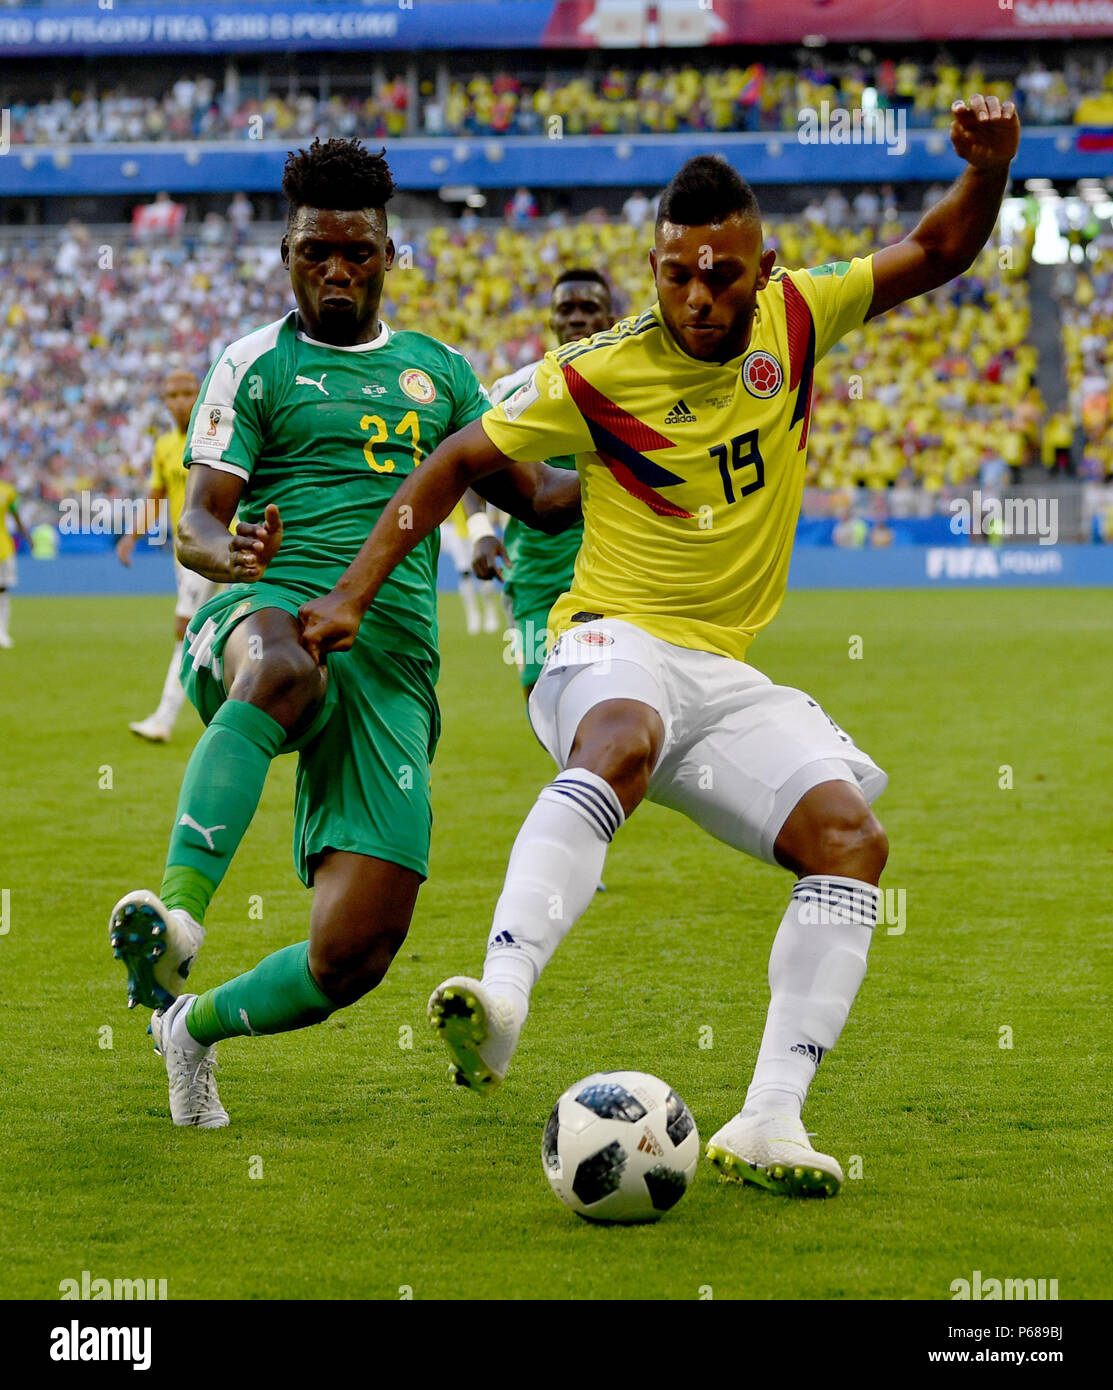 Samara, Russia. 28th June, 2018. Miguel Borja (R) of Colombia vies with Lamine Gassama of Senegal during the 2018 FIFA World Cup Group H match between Colombia and Senegal in Samara, Russia, June 28, 2018. Colombia won 1-0 and advanced to the round of 16. Credit: Chen Cheng/Xinhua/Alamy Live News Stock Photo